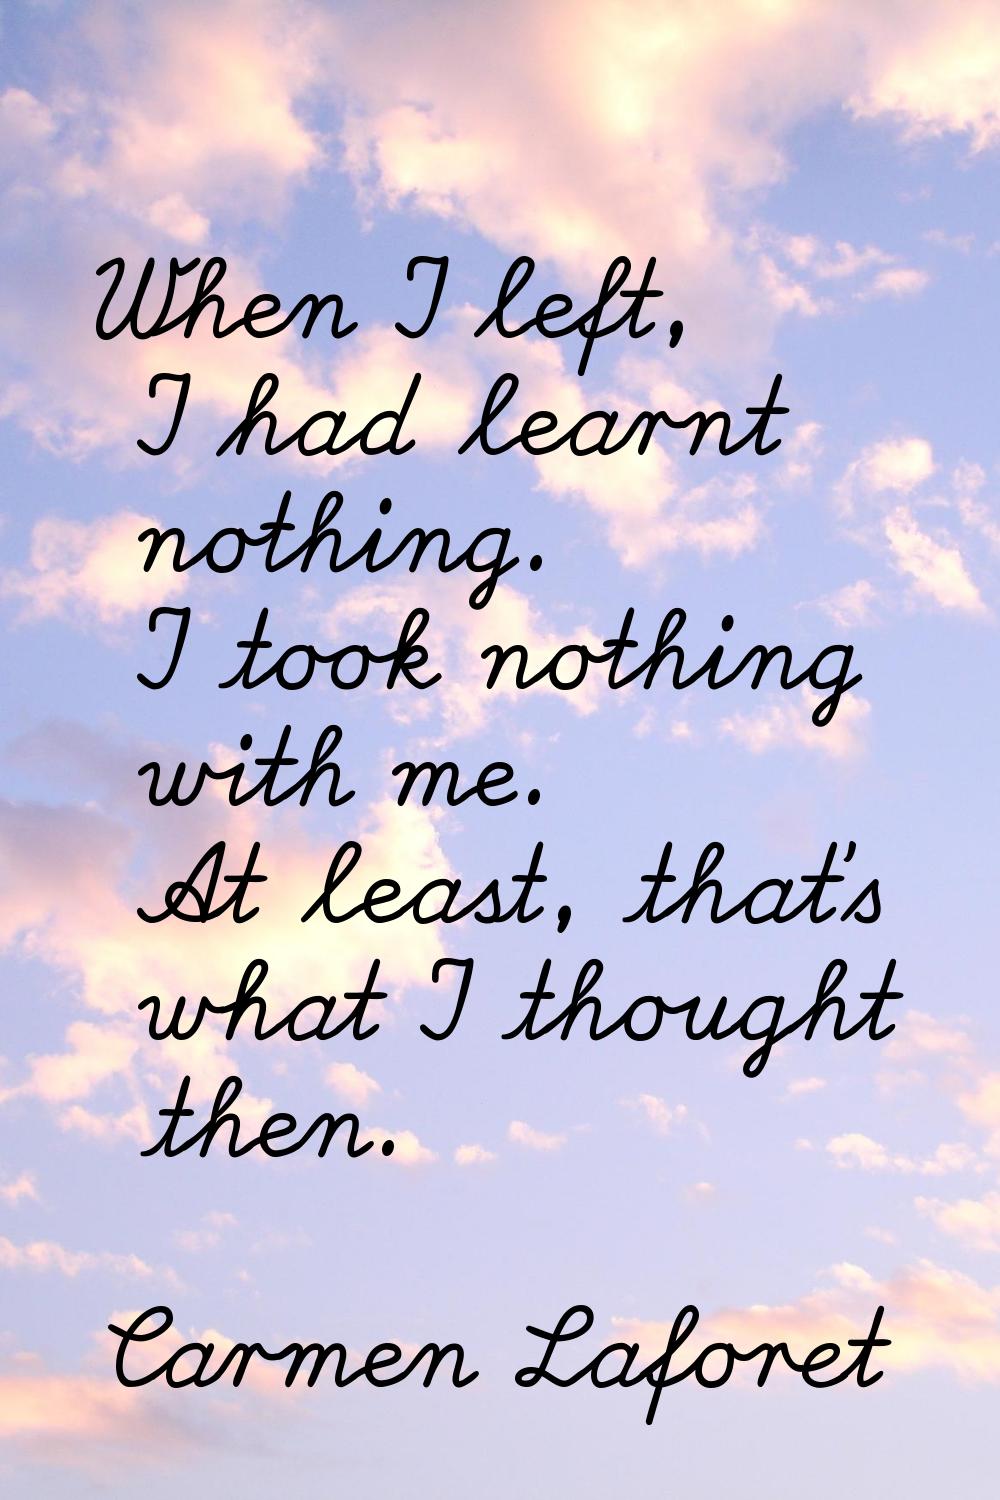 When I left, I had learnt nothing. I took nothing with me. At least, that's what I thought then.